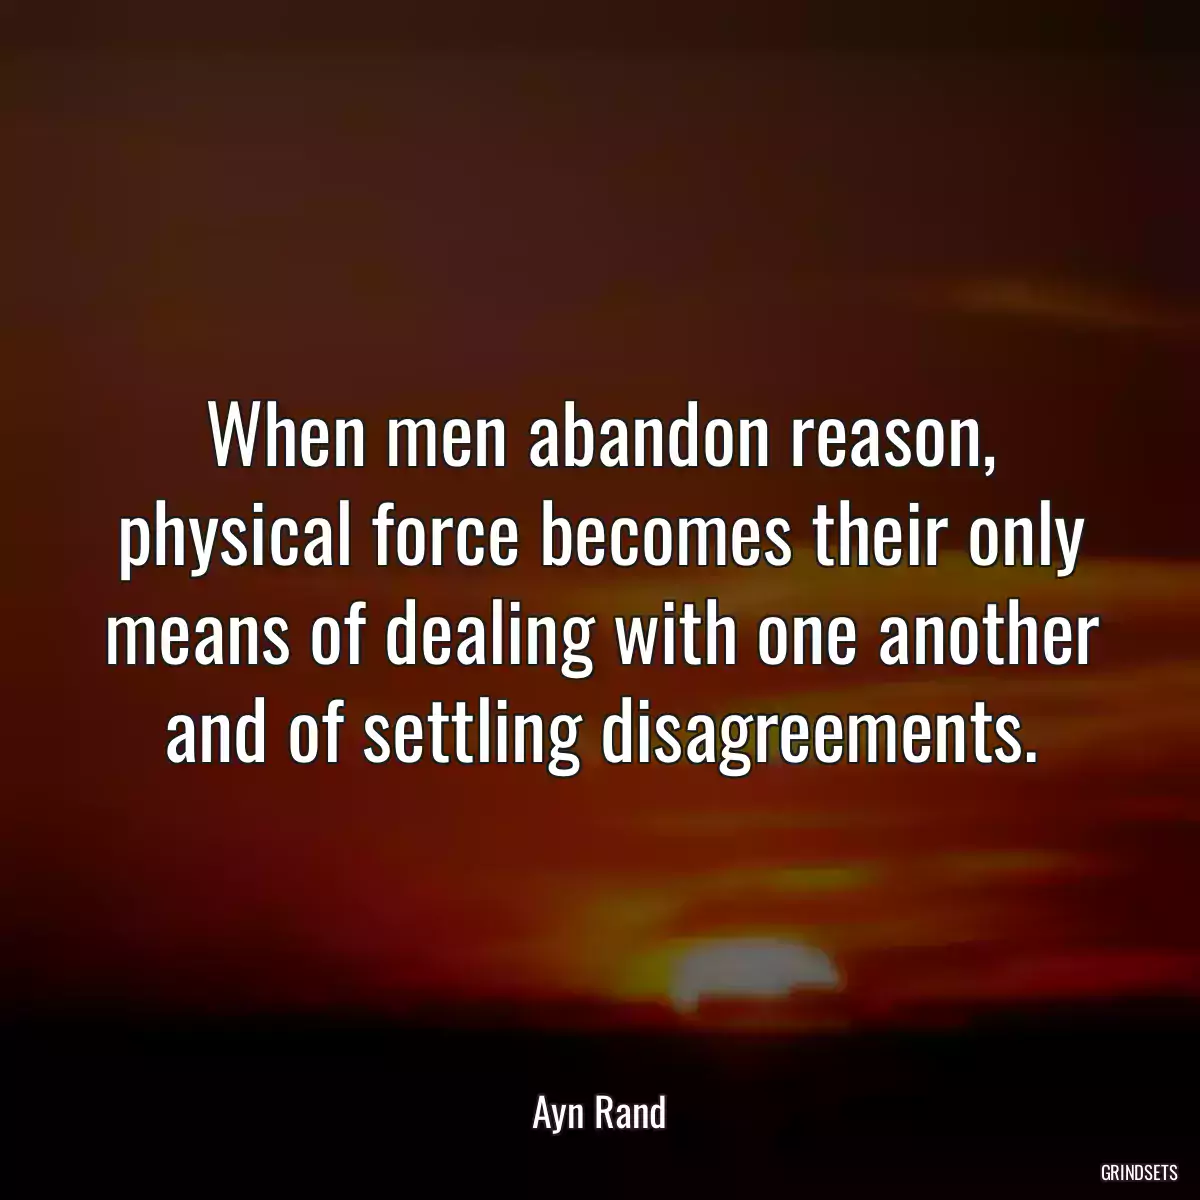 When men abandon reason, physical force becomes their only means of dealing with one another and of settling disagreements.